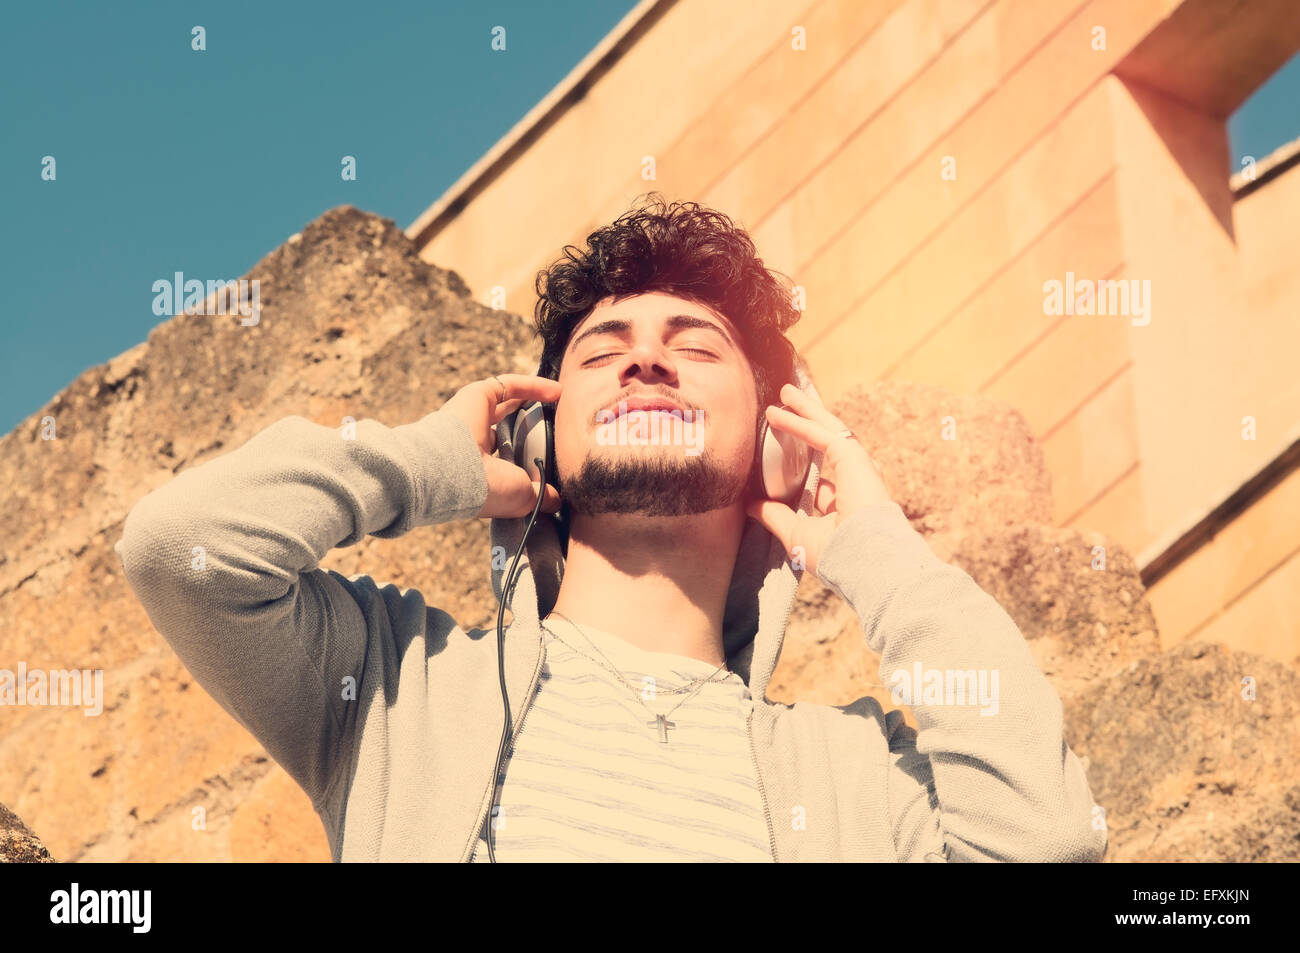 boy listening to music in an urban setting Stock Photo